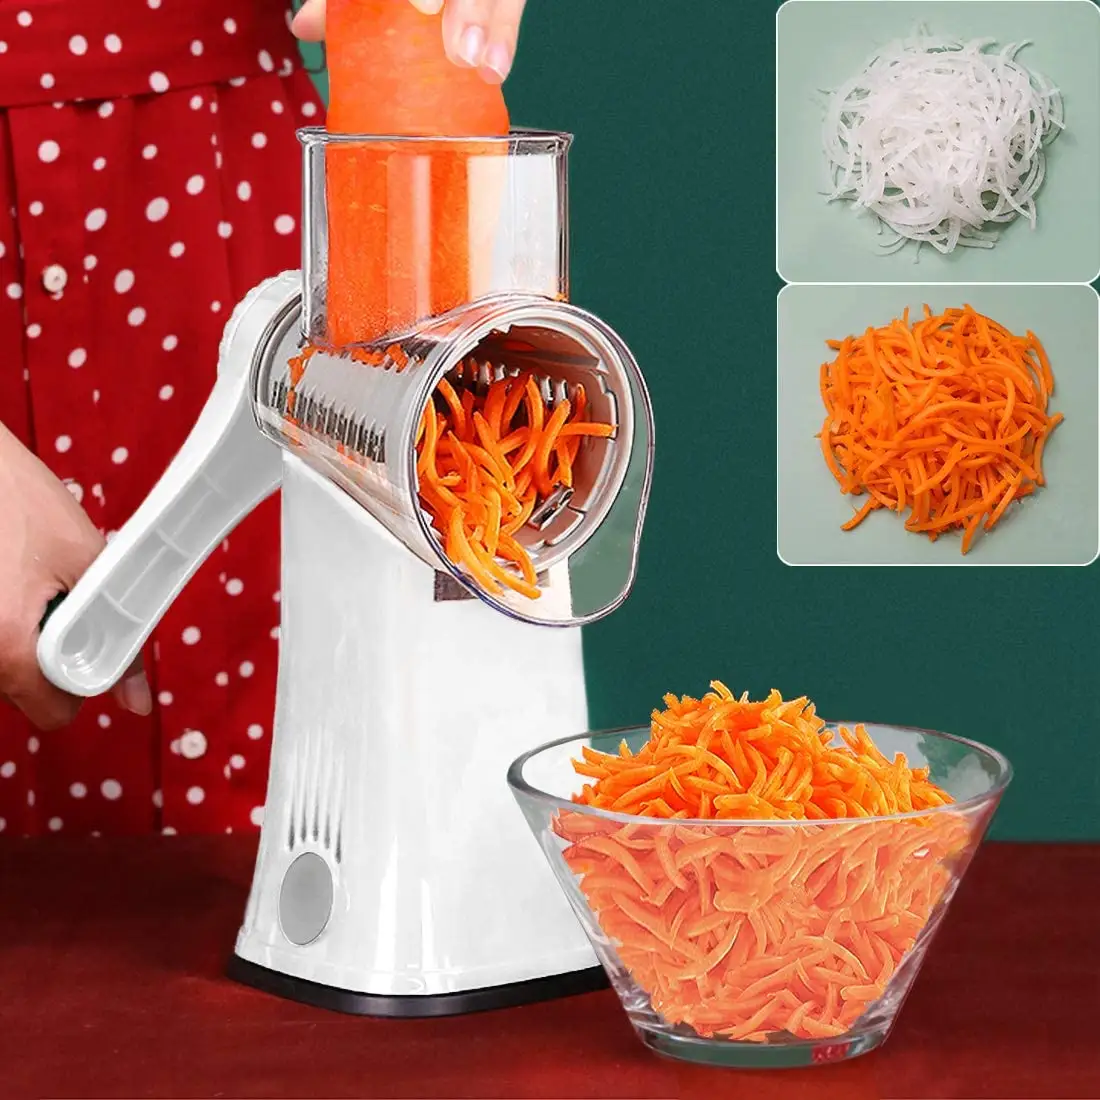 Best 5 in 1 Rotary Cheese Grater with Handheld Cheese Shredder Food Vegetable Hand Crank Grater with Storage Box for Blades